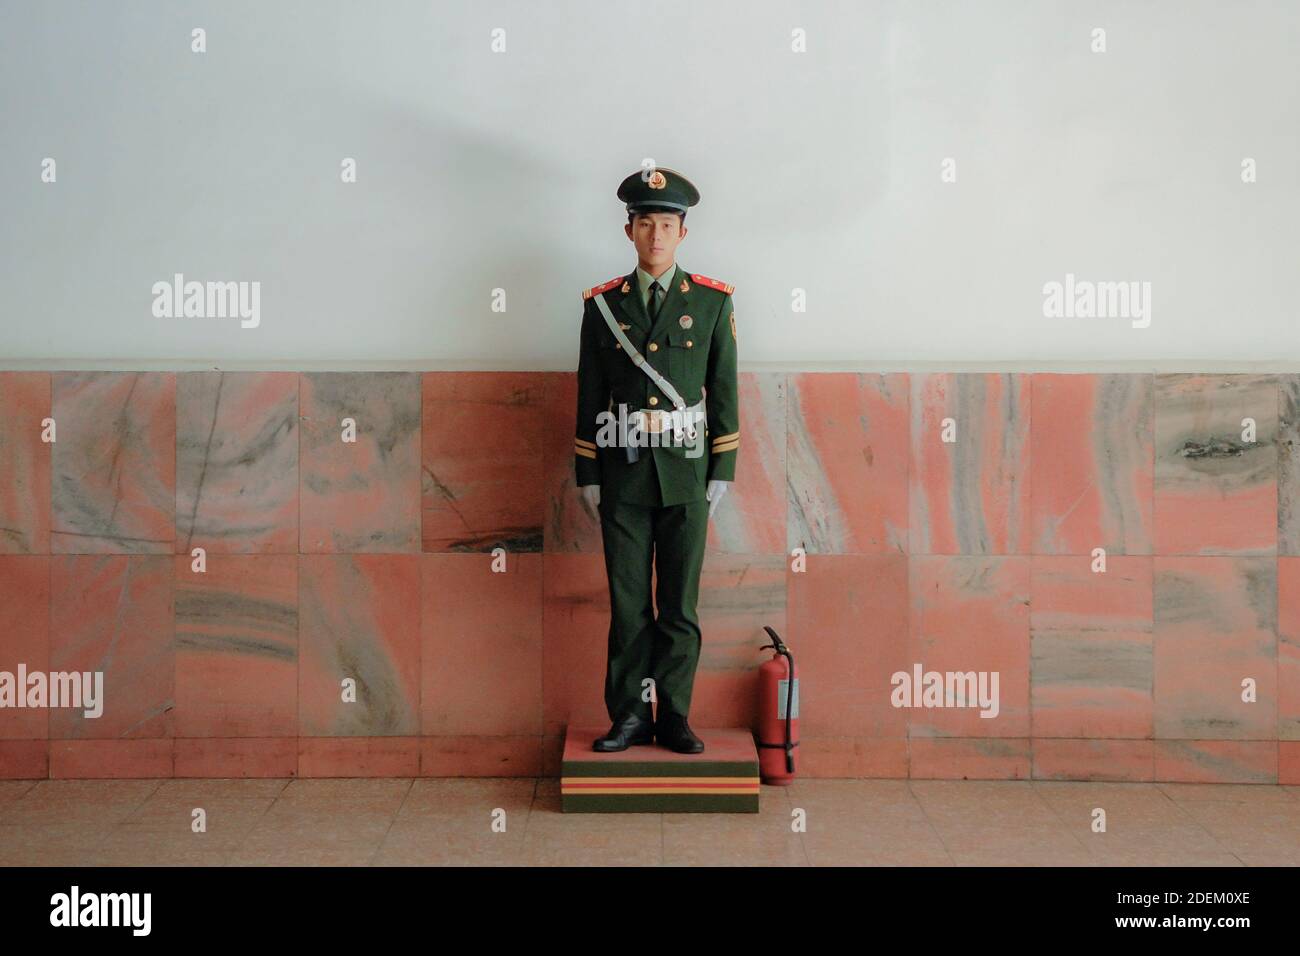 A member of the Chinese People's Armed Police stands guard at Tiananmen Square in Beijing, China, on Ocober 28th 2010 Stock Photo